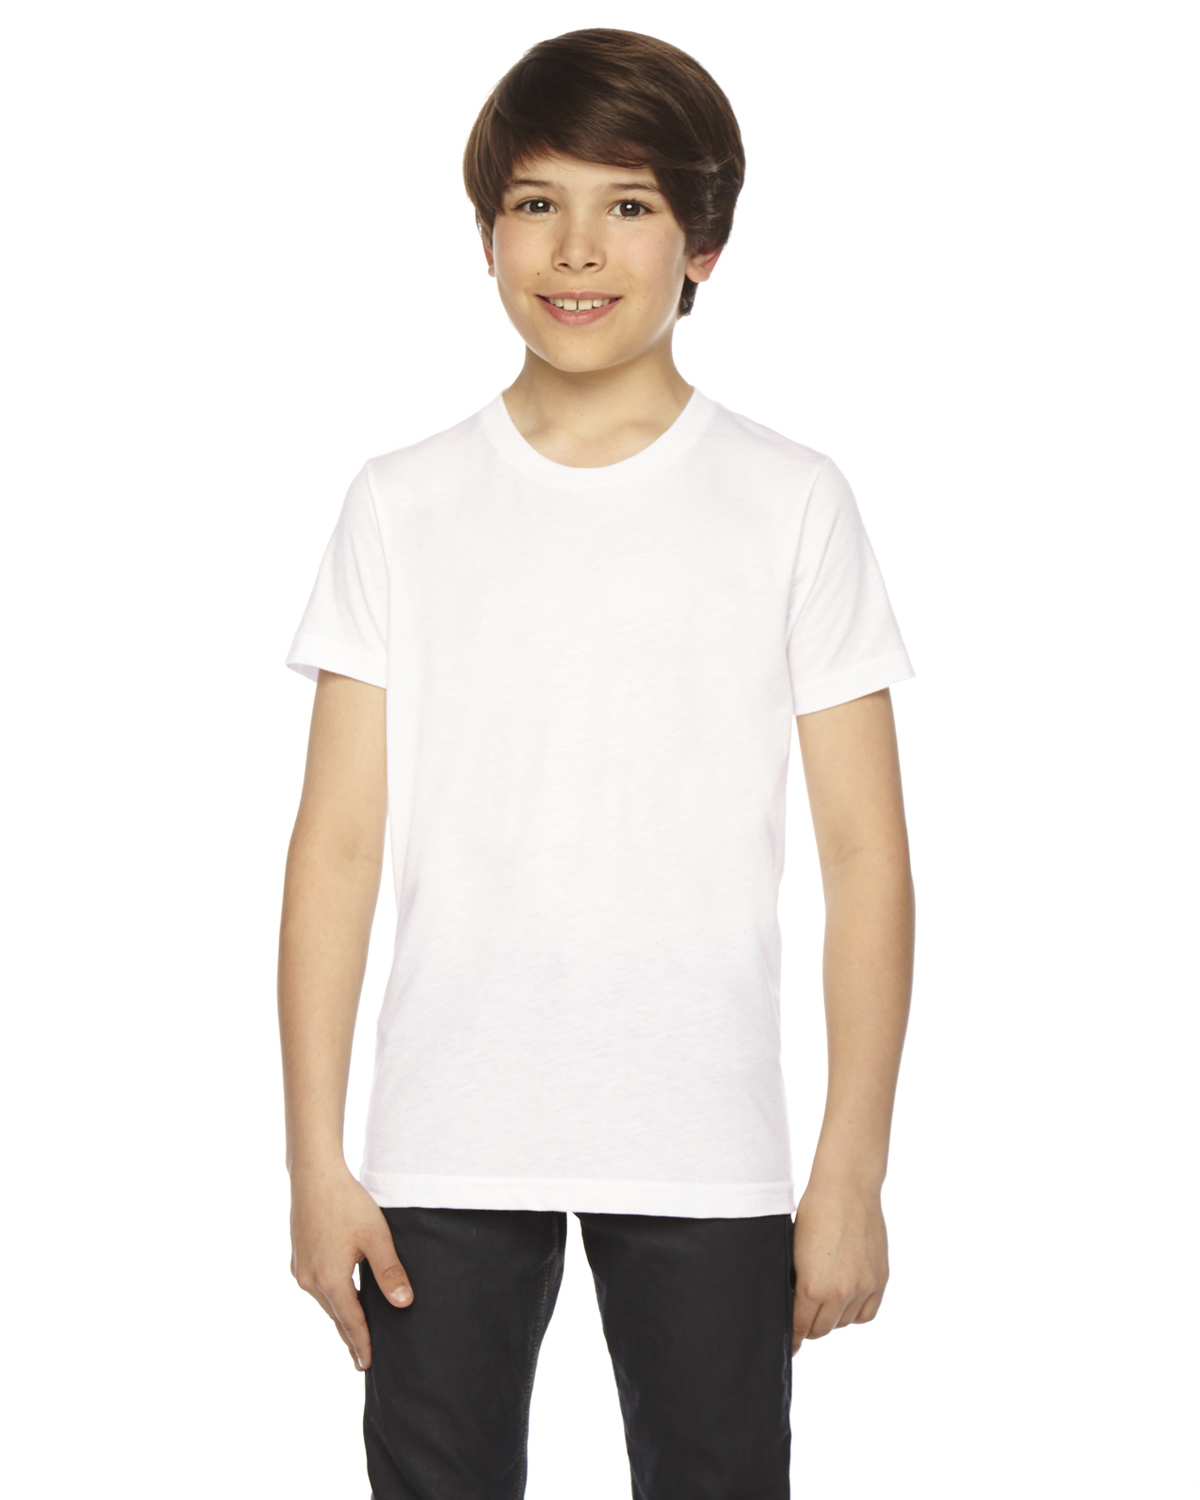 BB201W American Apparel Youth Poly-Cotton Short-Sleeve Crewneck